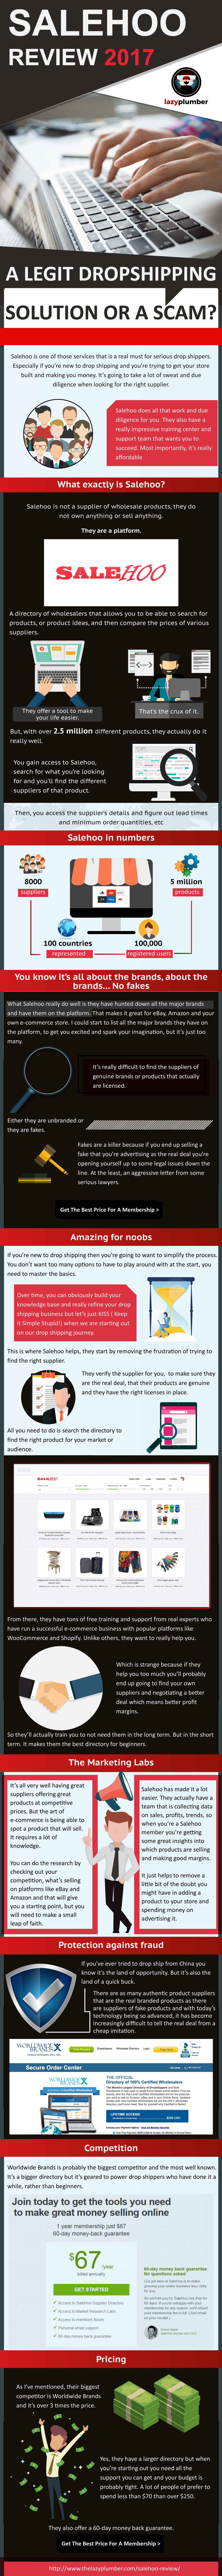 Salehoo Review 2017 – A Legit Dropshipping Solution Or A Scam?